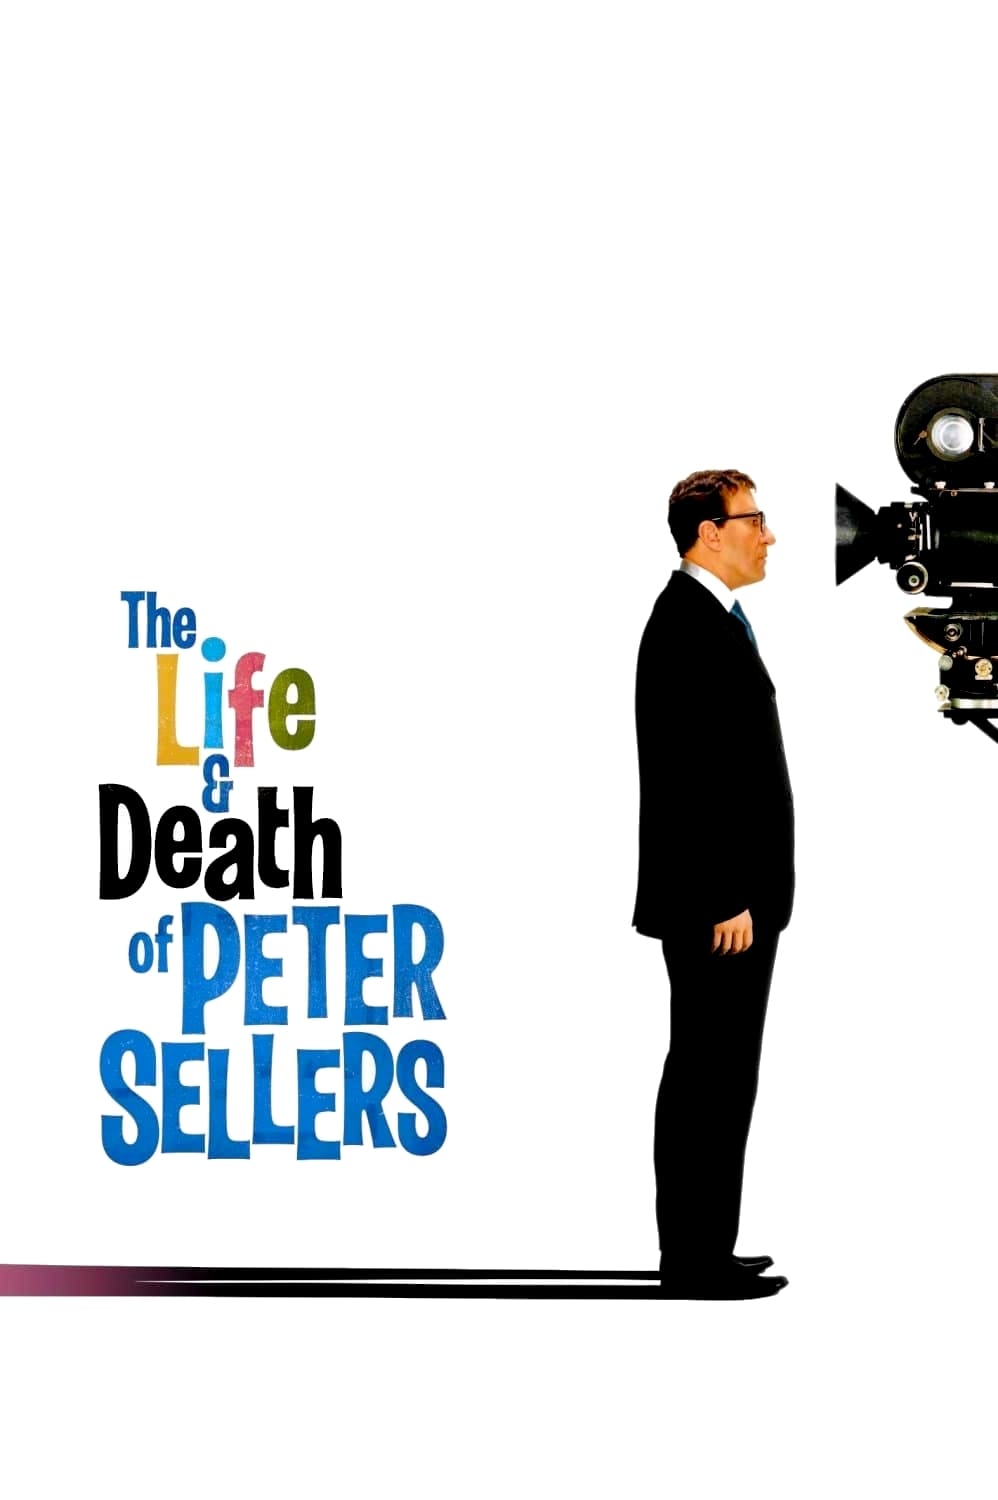 Plakat von "The Life and Death of Peter Sellers"